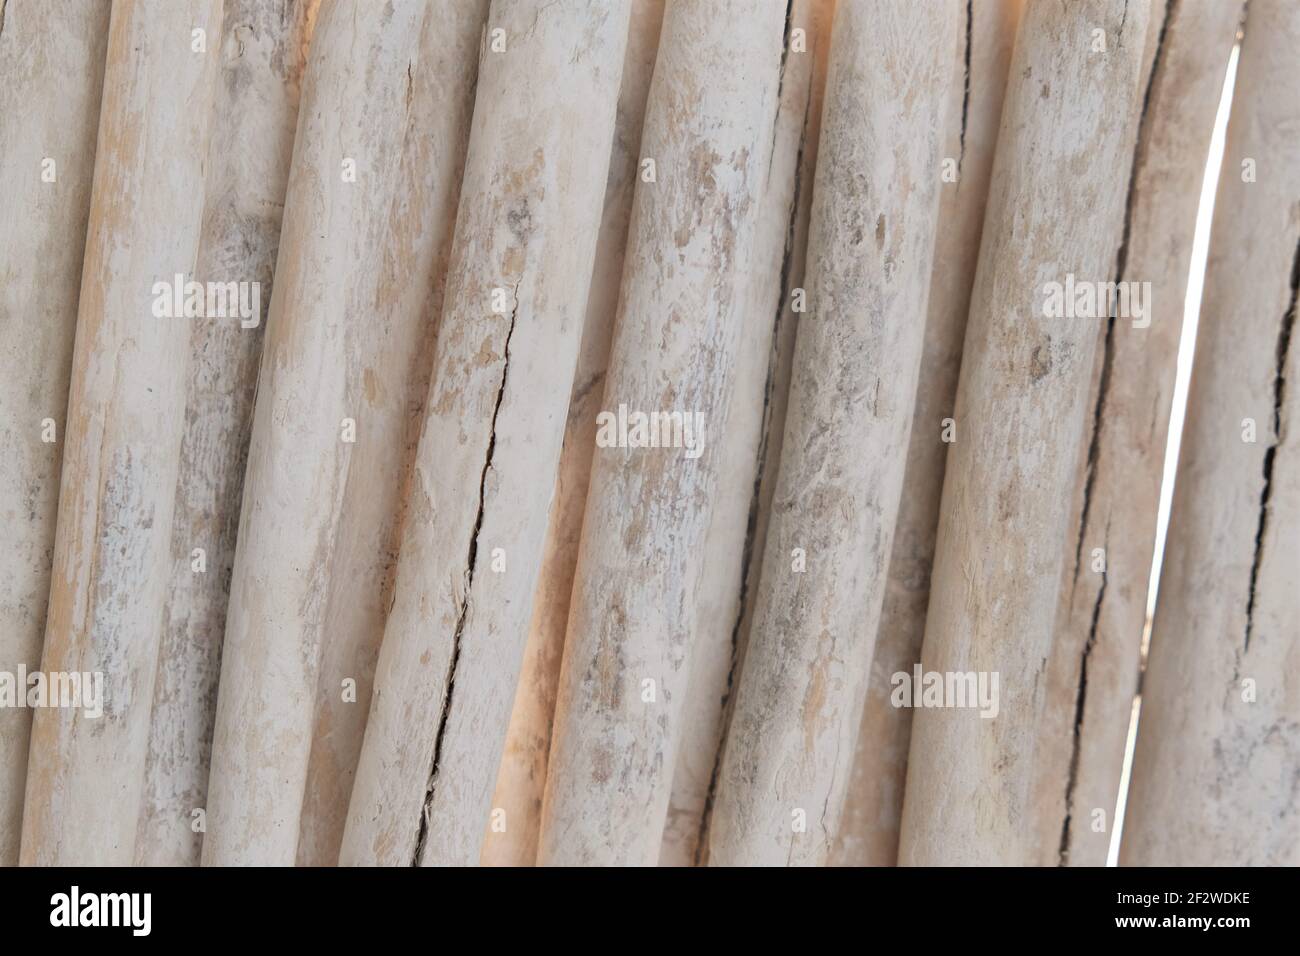 Driftwood. row of white sea snags.White sea driftwood close-up texture.Wooden nature beige background. Stock Photo